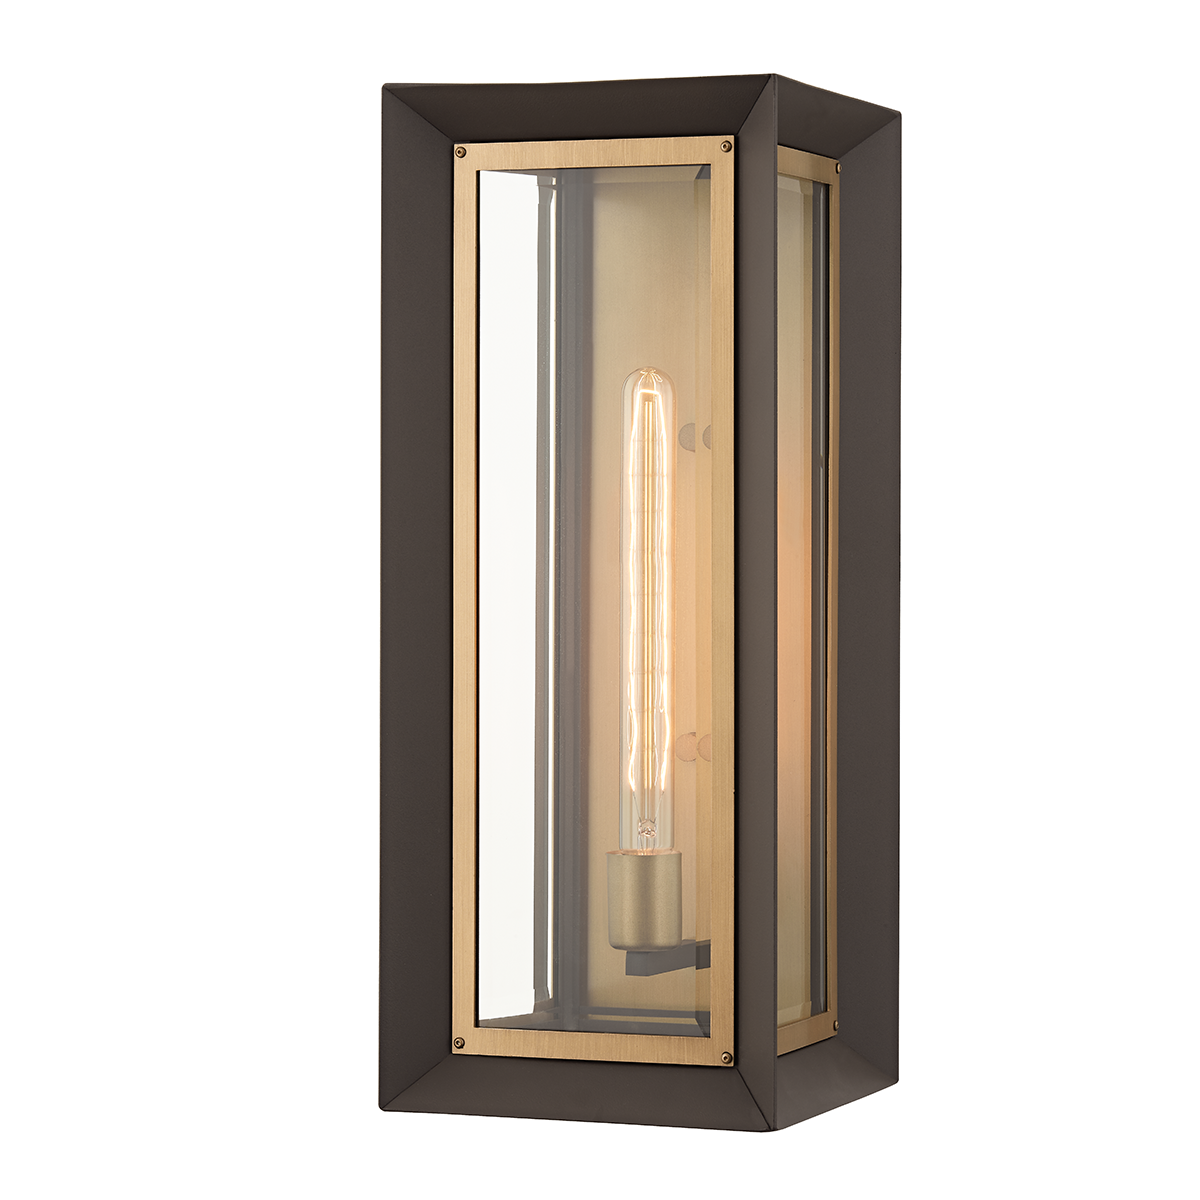 Troy Lighting 1 LIGHT LARGE EXTERIOR WALL SCONCE B4053 Outdoor l Wall Troy Lighting   